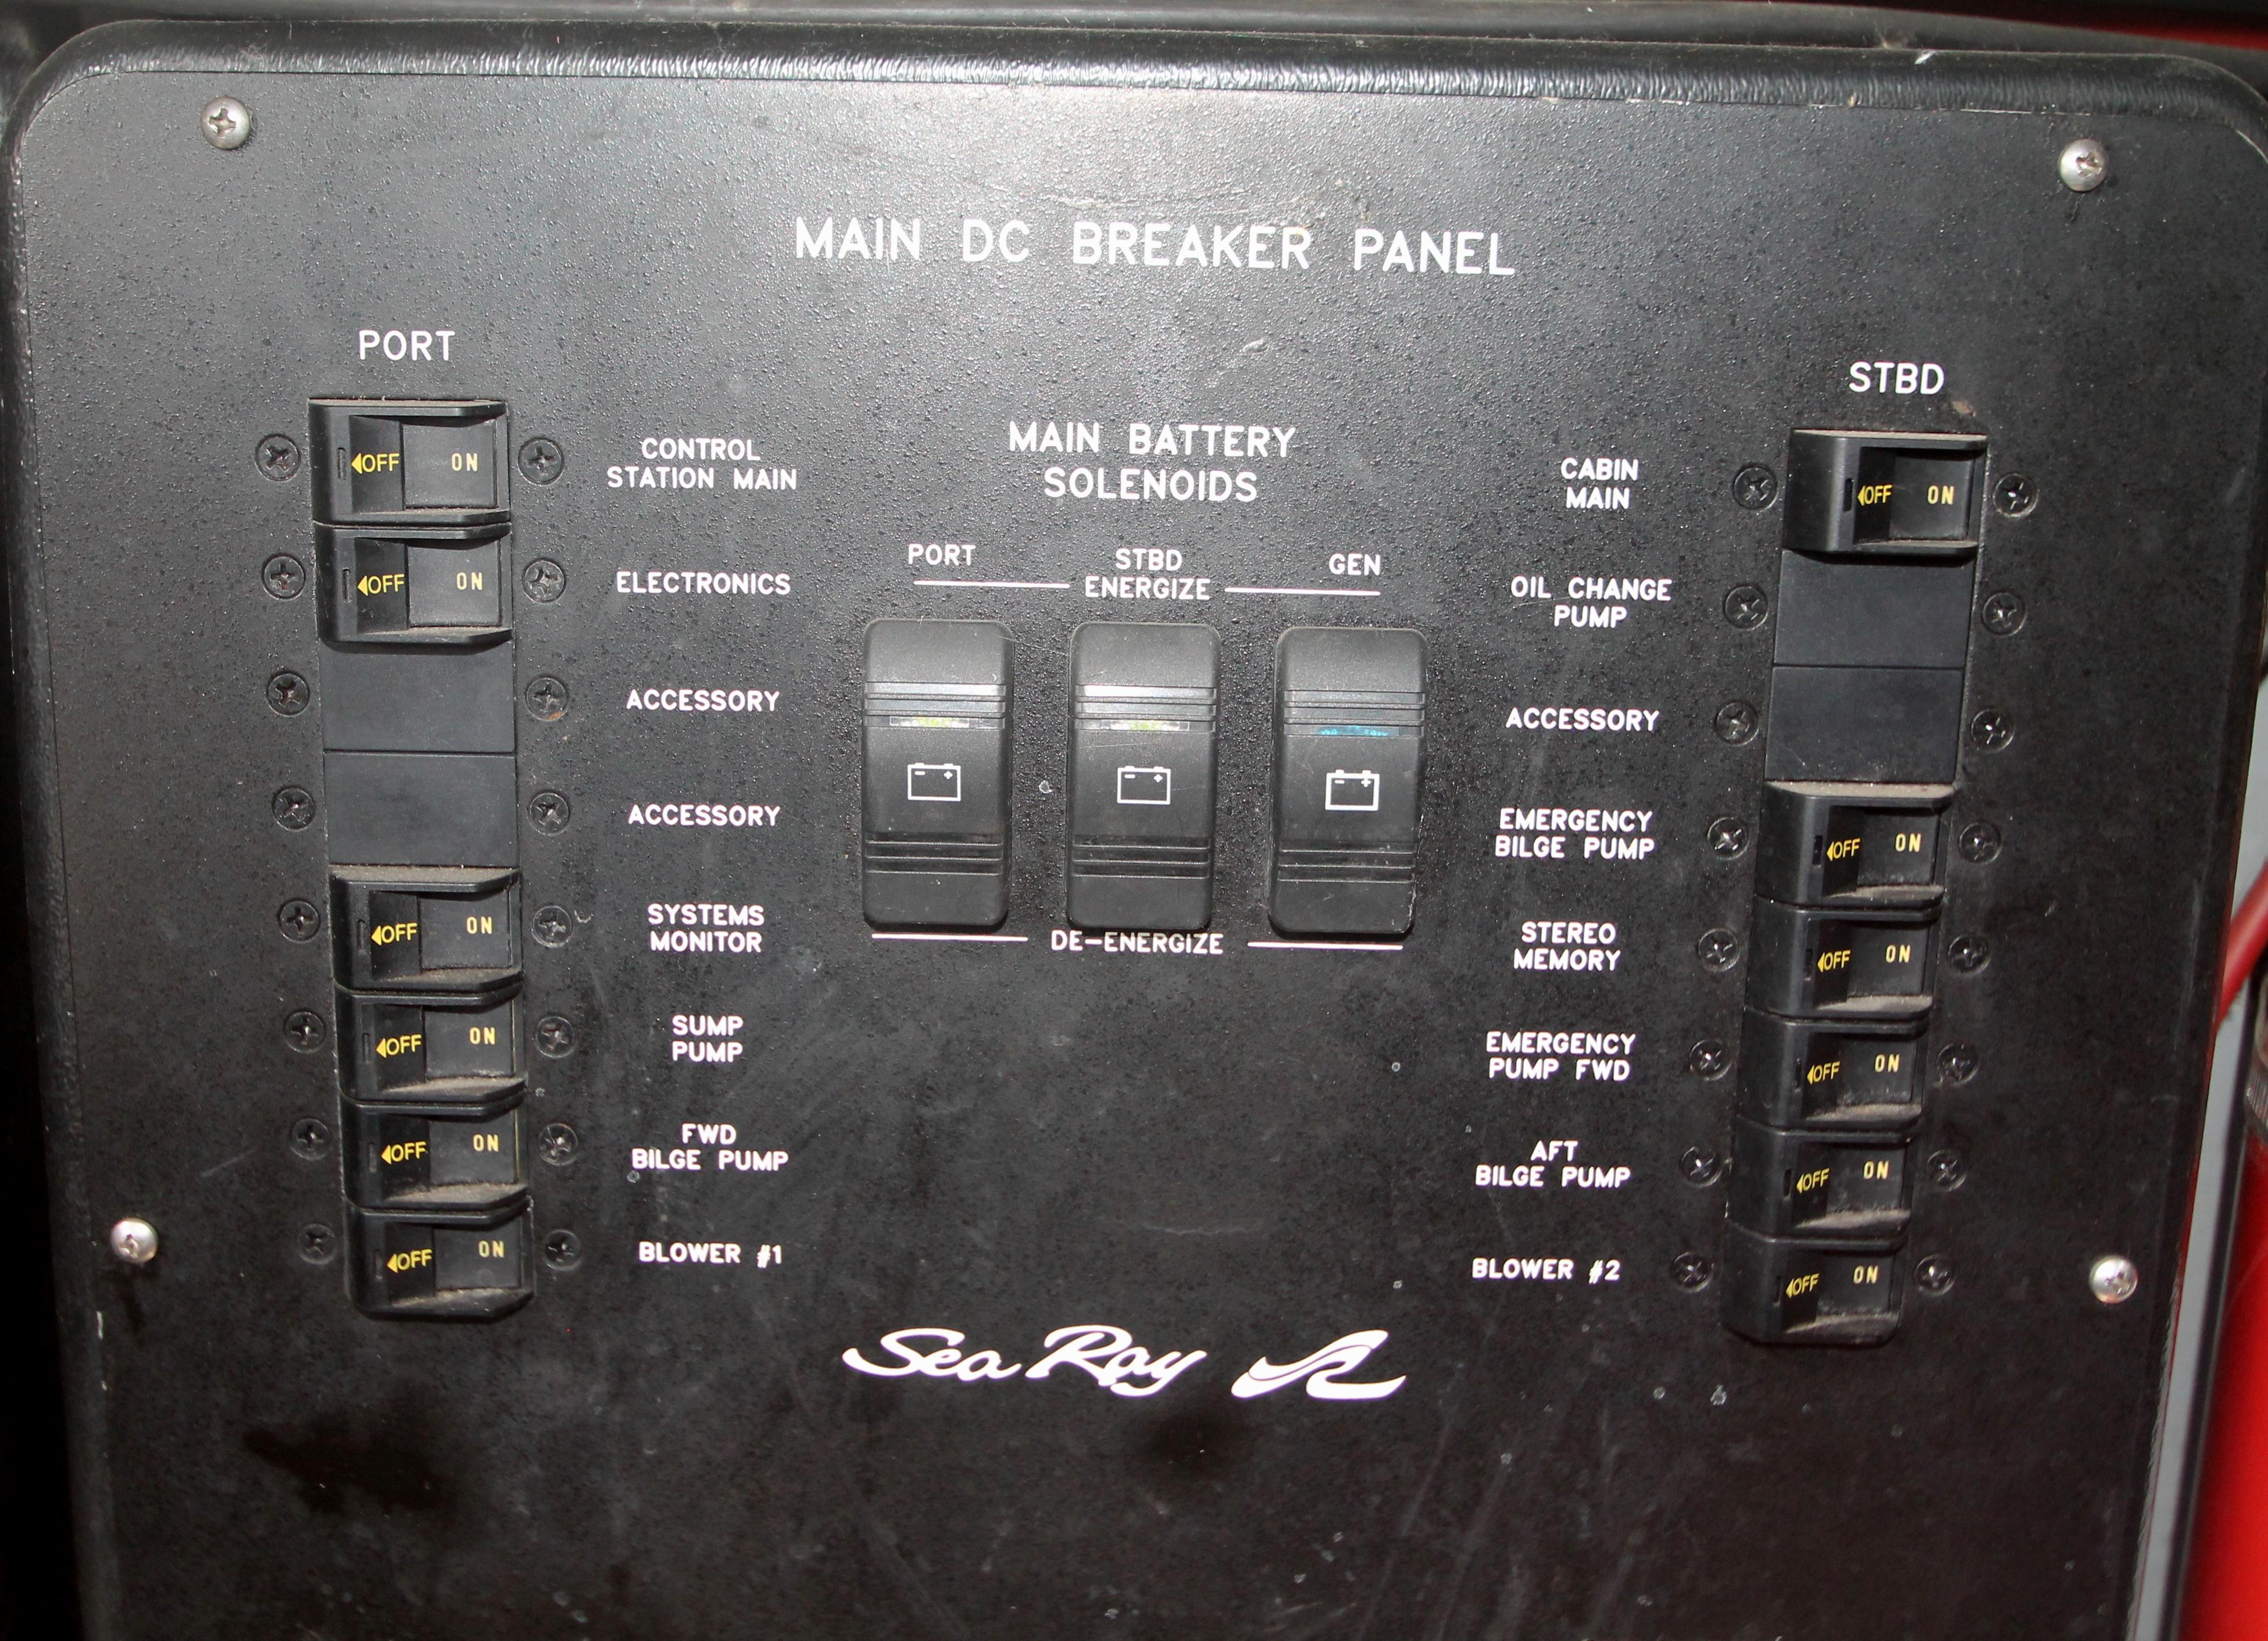 Electrical Panel in Engine Compartment